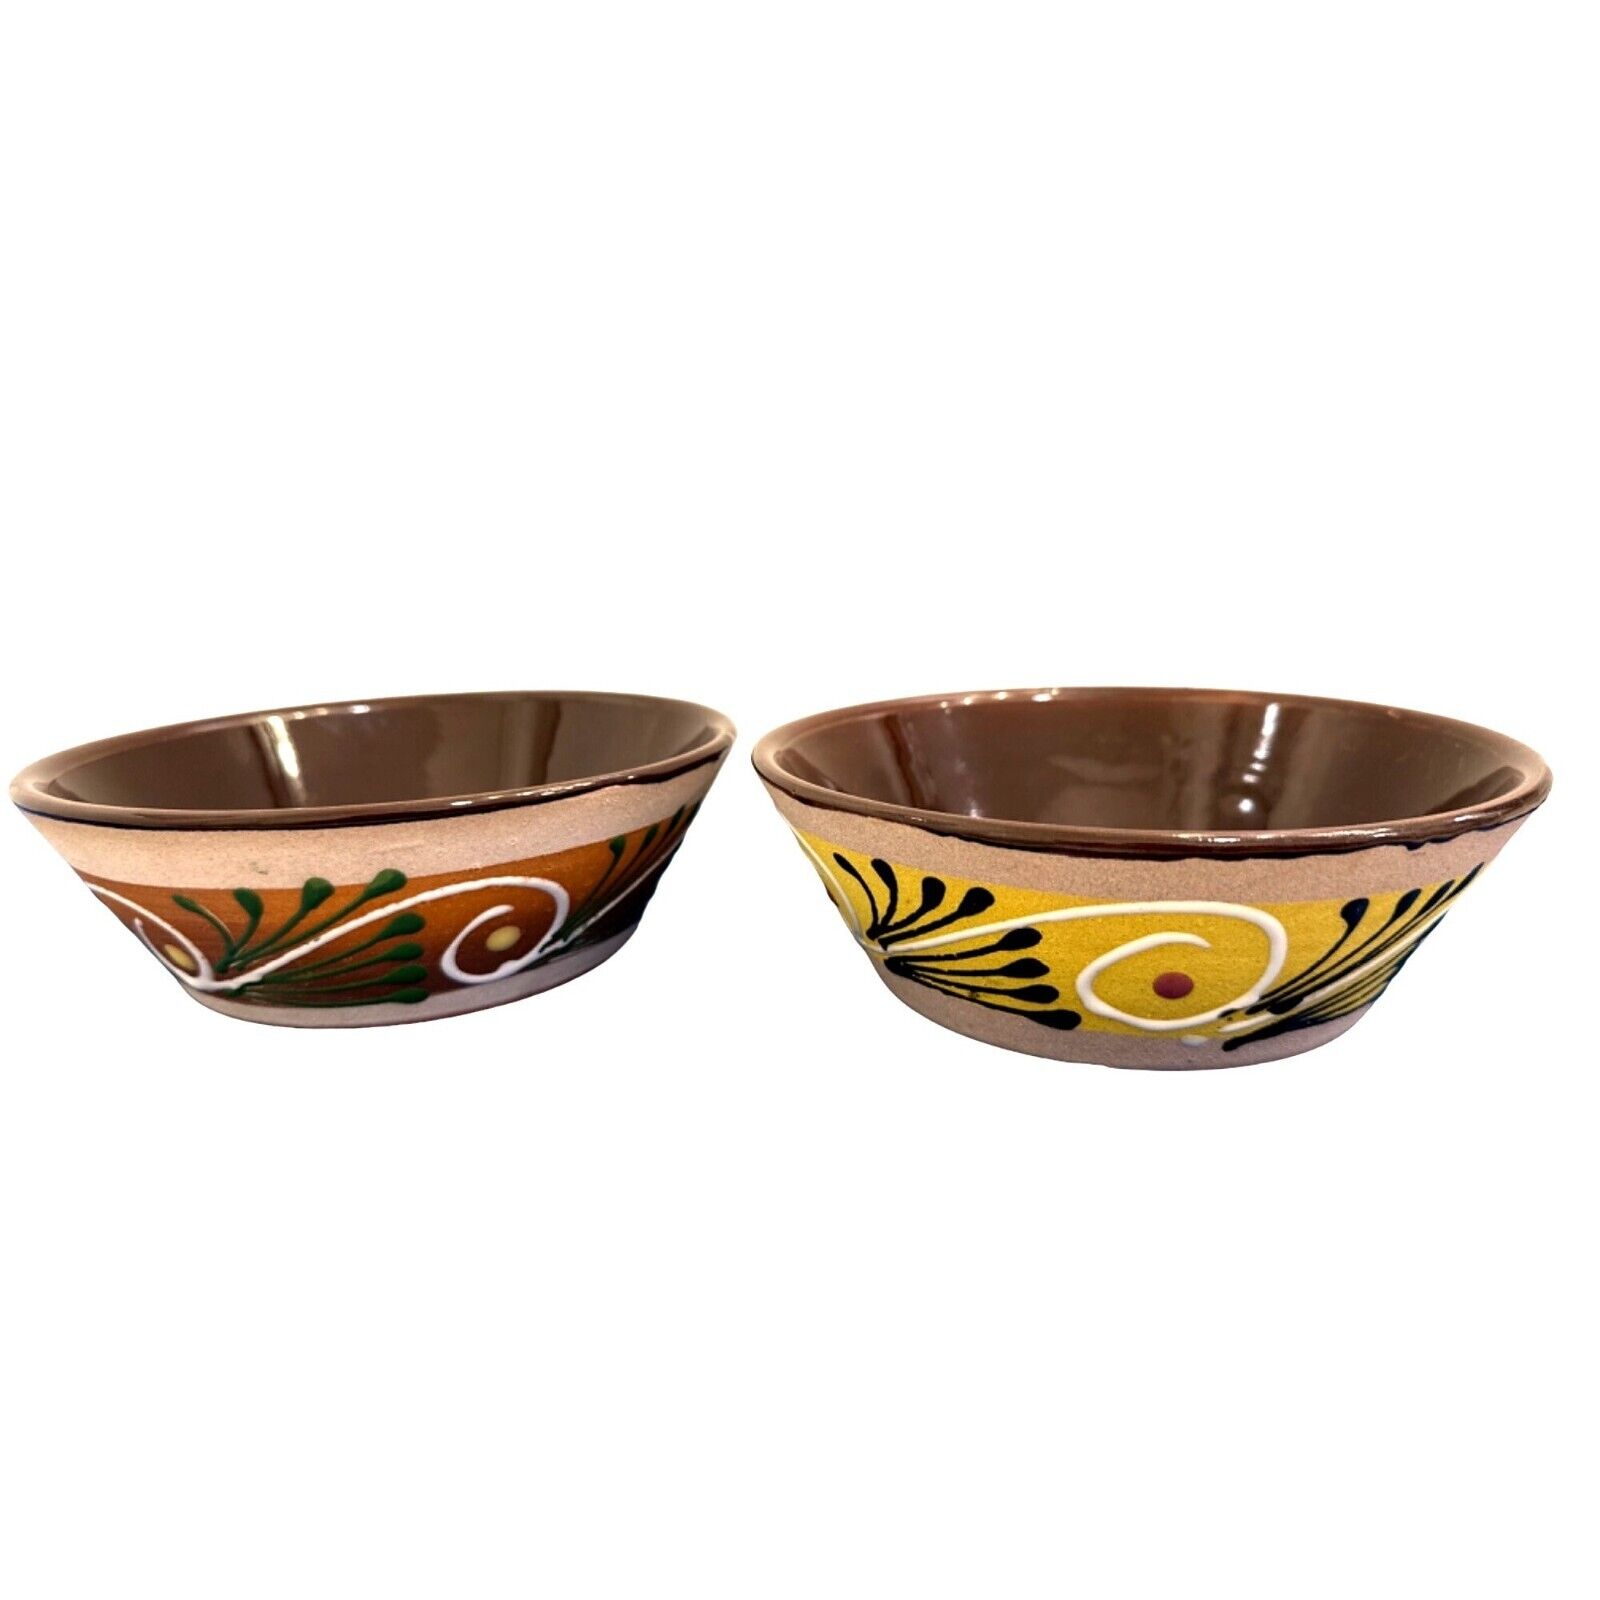 2 Handmade Mexican Red Clay Pottery Textured Bowls